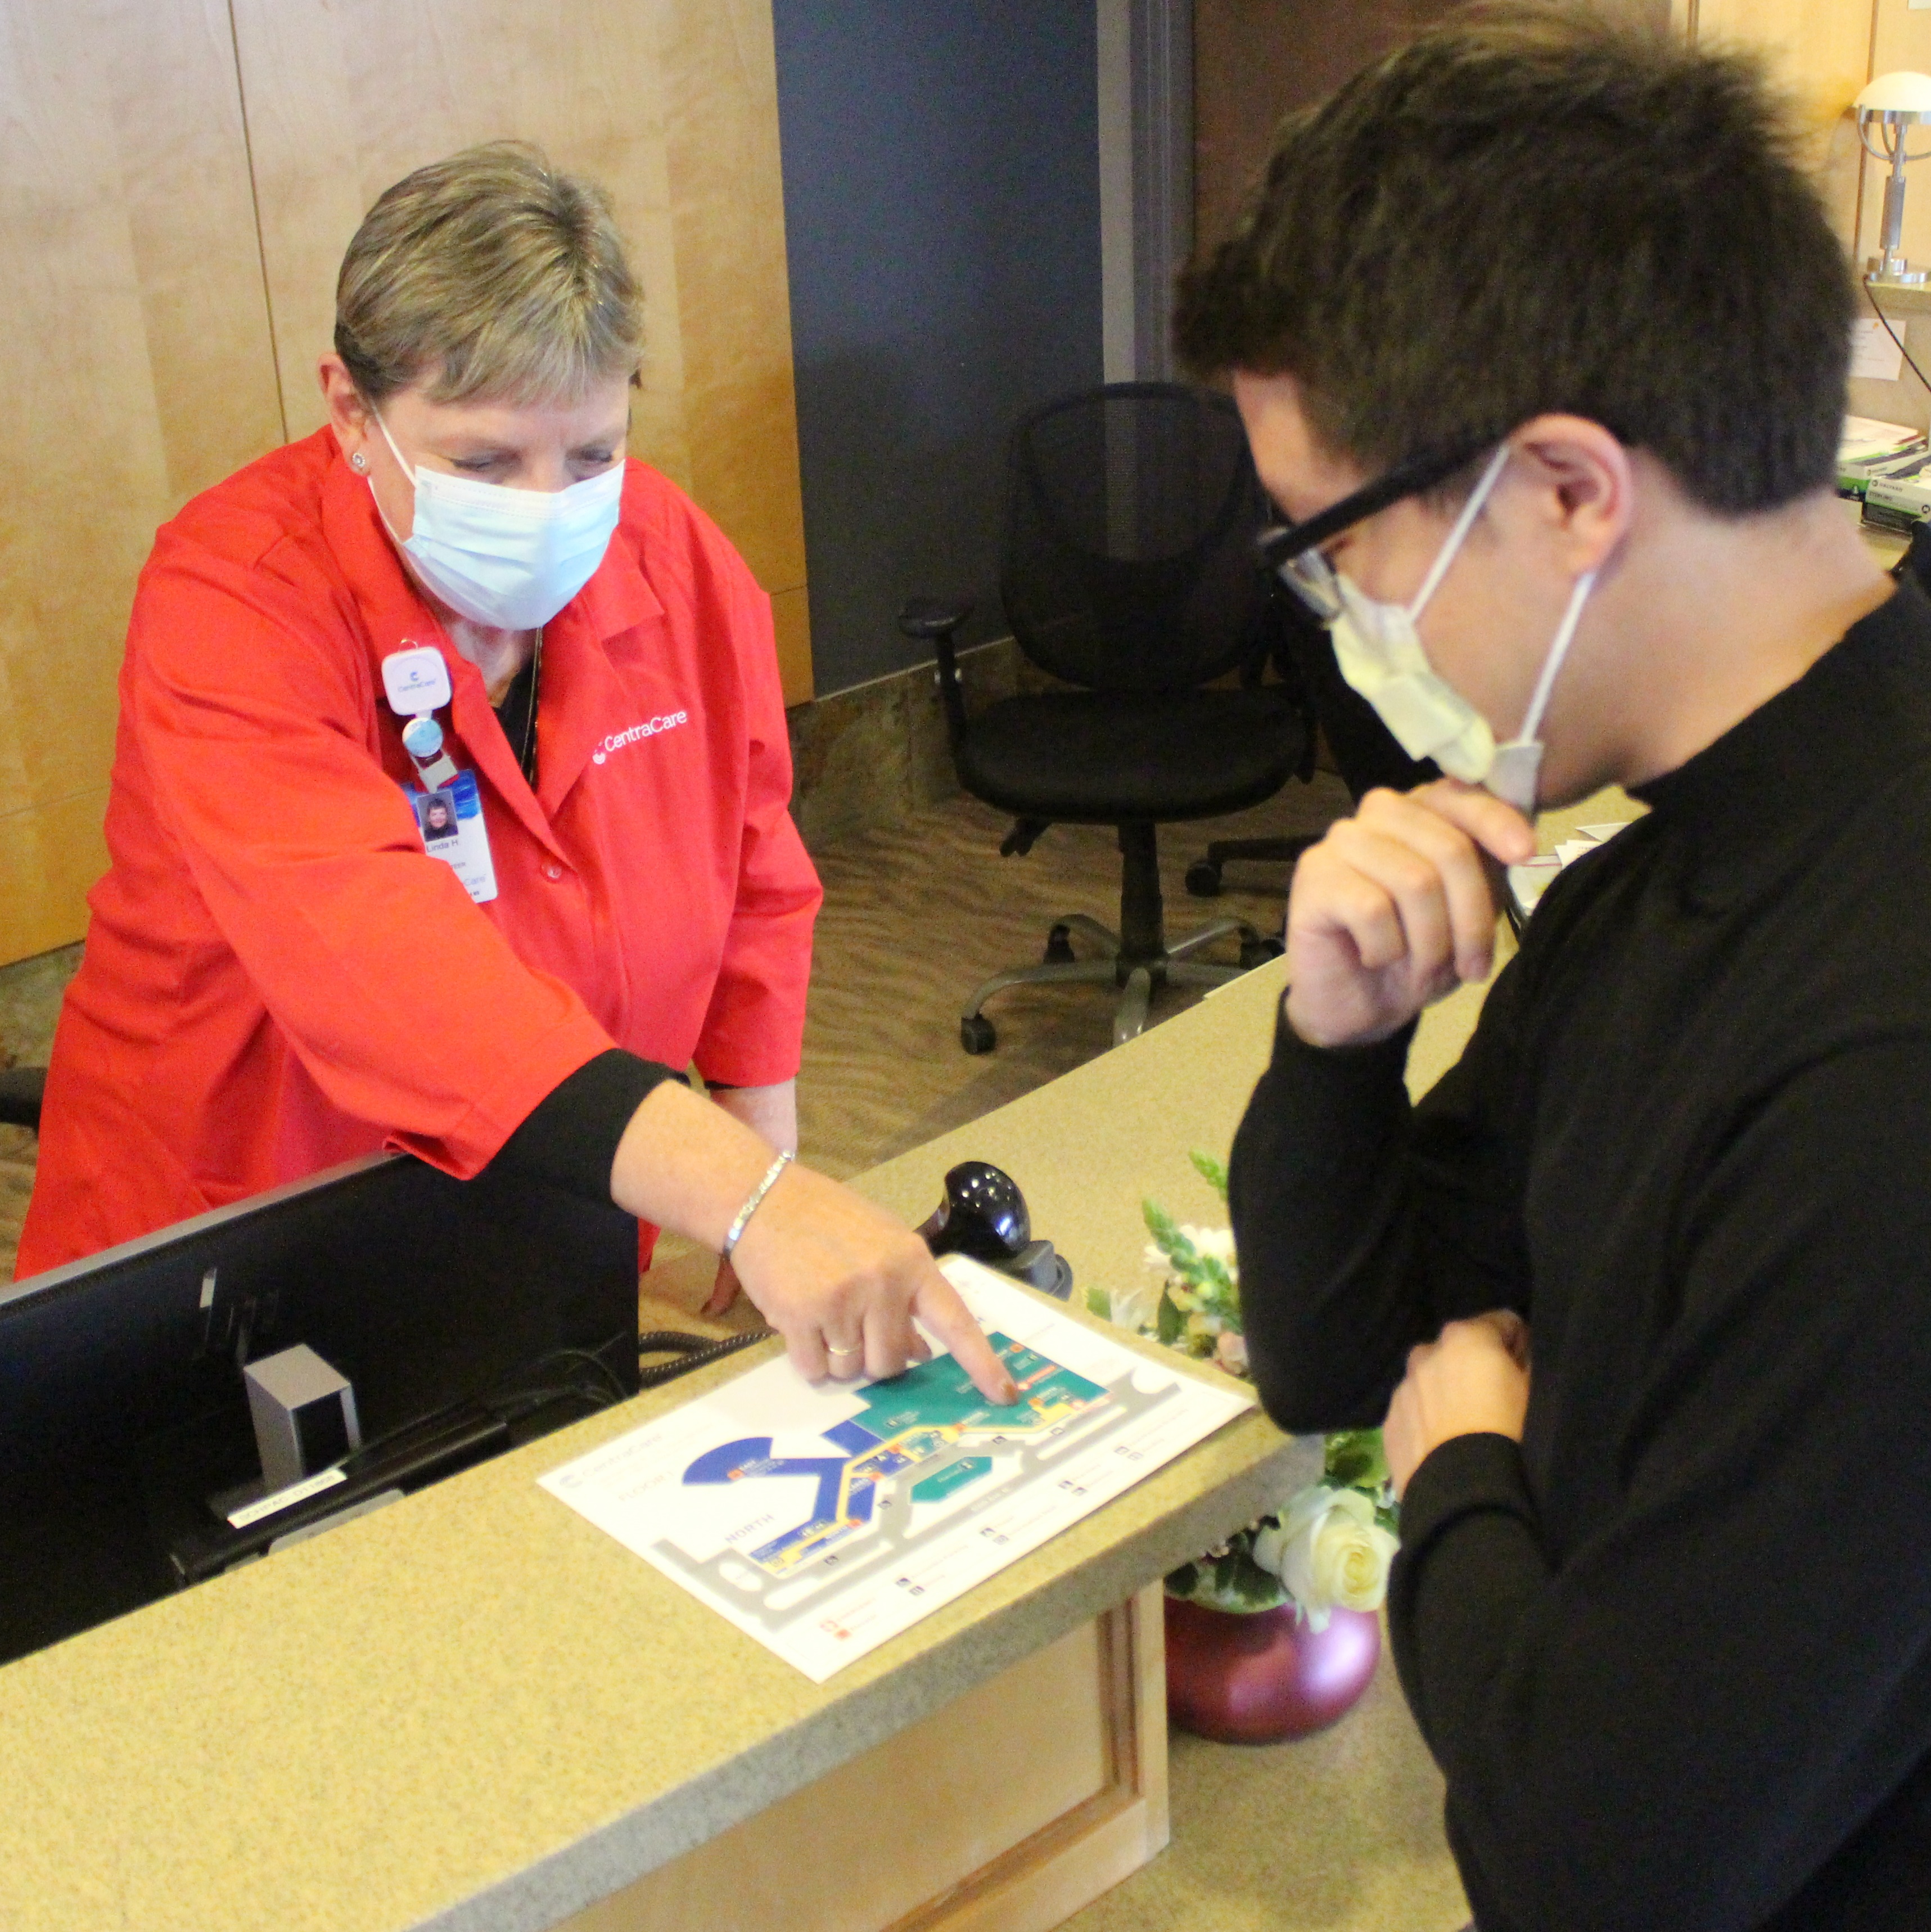 Volunteers play an important role in making CentraCare feel like a caring and welcoming place.